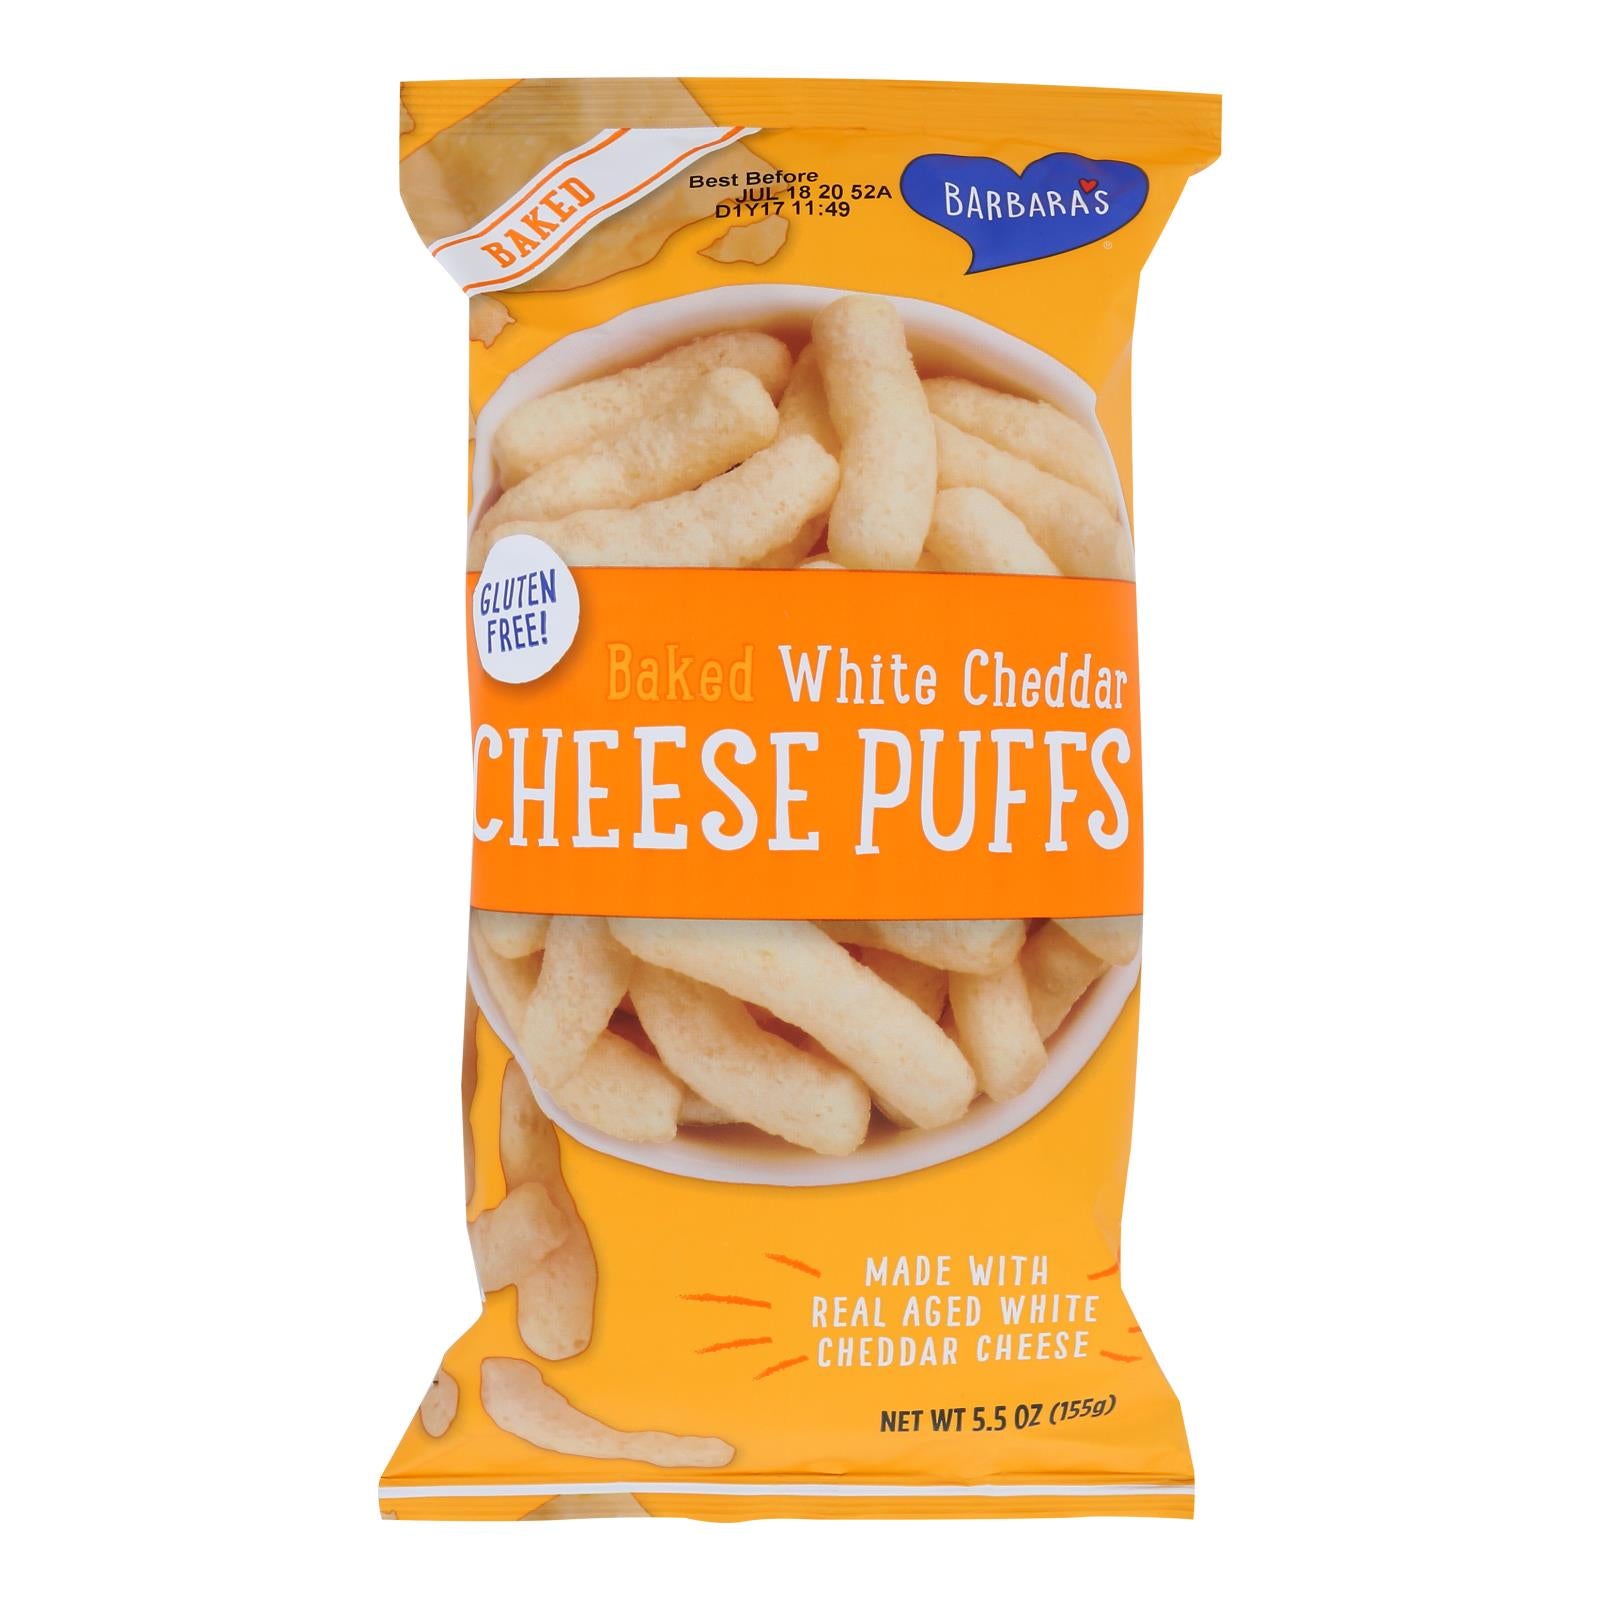 Barbara's Bakery - Baked White Cheddar Cheese Puffs - Case Of 12 - 5.5 Oz.